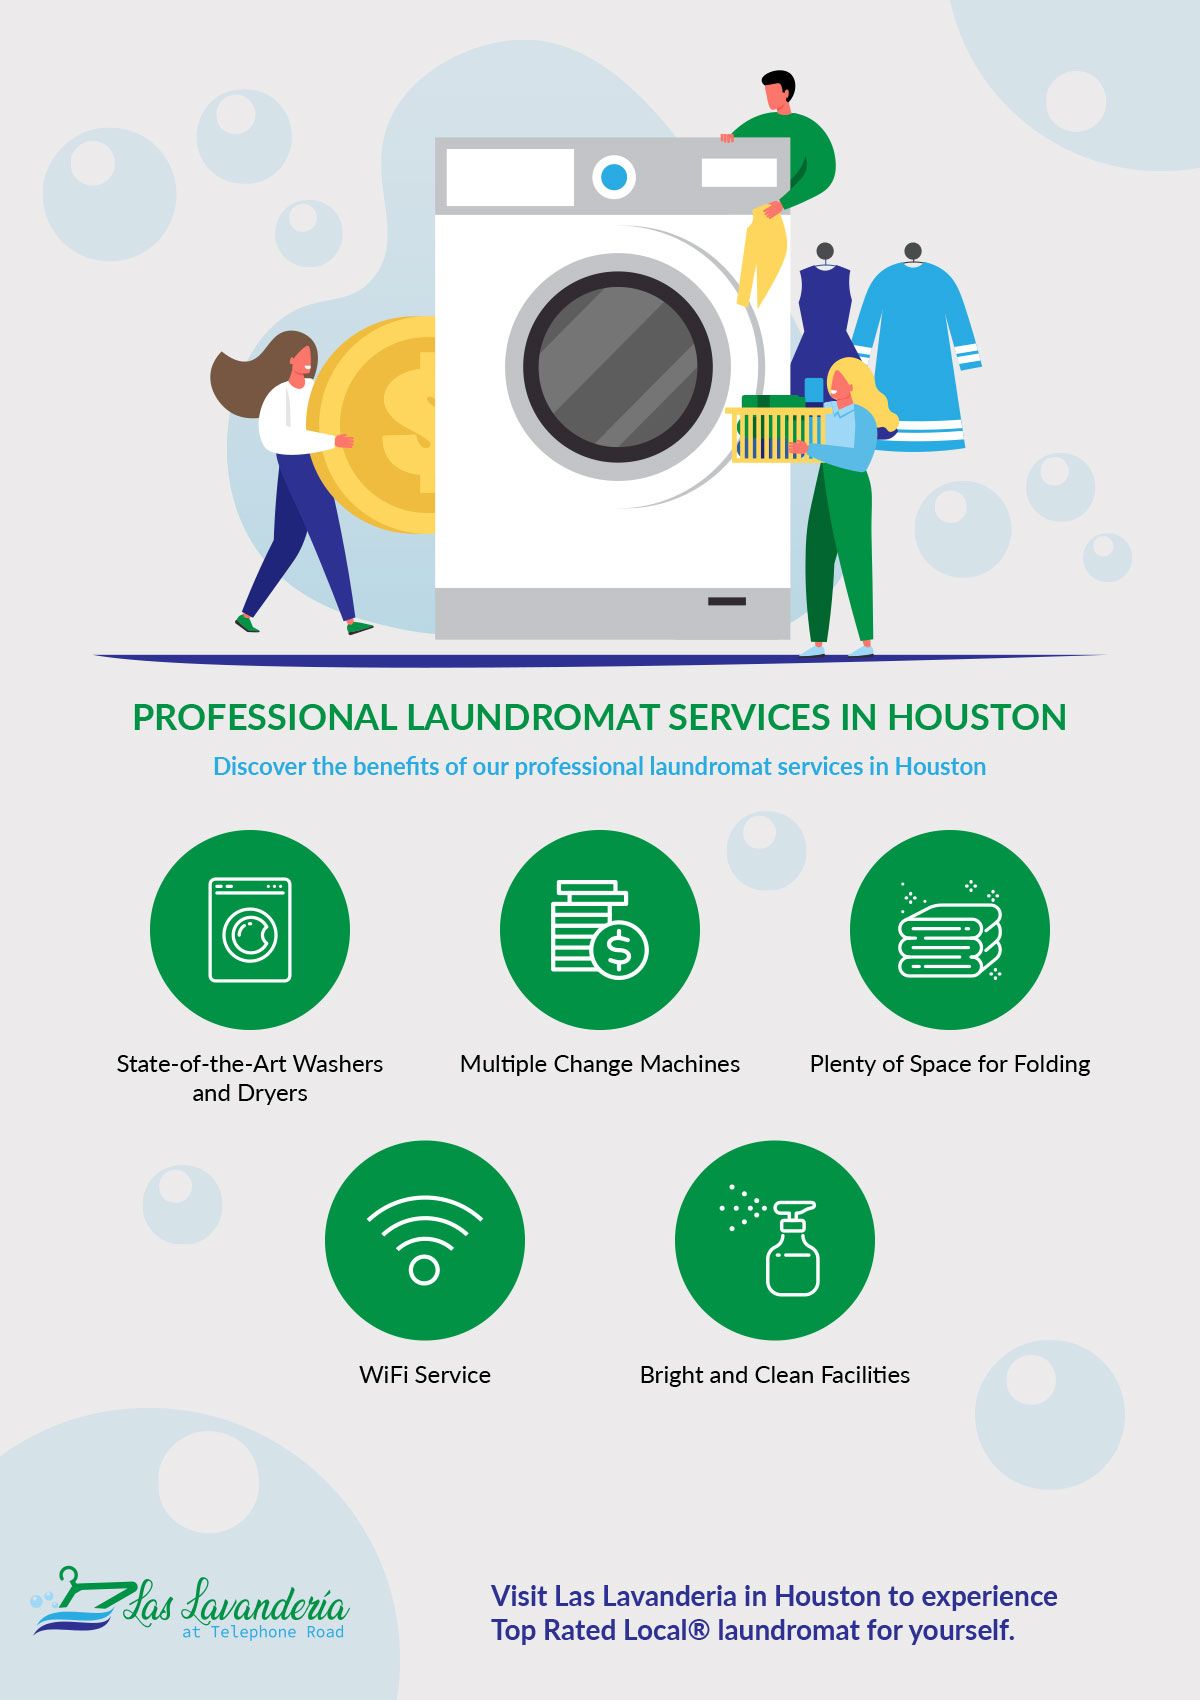 Professional-Laundromat-Services-in-Houston-Infographic-60354cf82351a.jpg